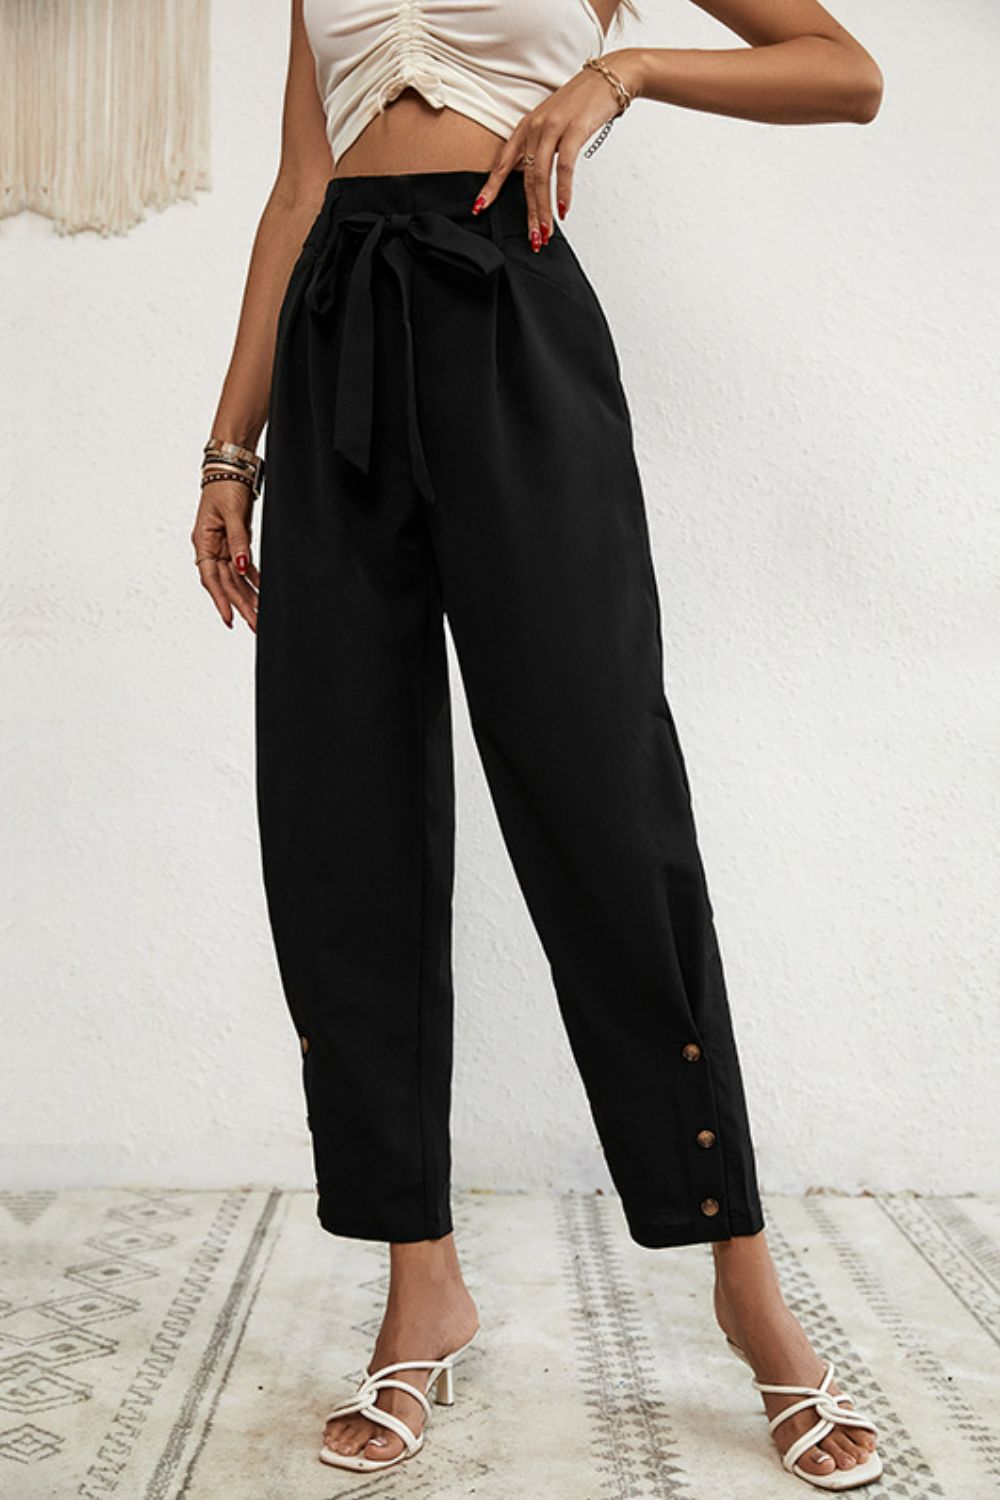 Buttoned Tie-Waist Cropped Pants - Bottoms - Pants - 4 - 2024